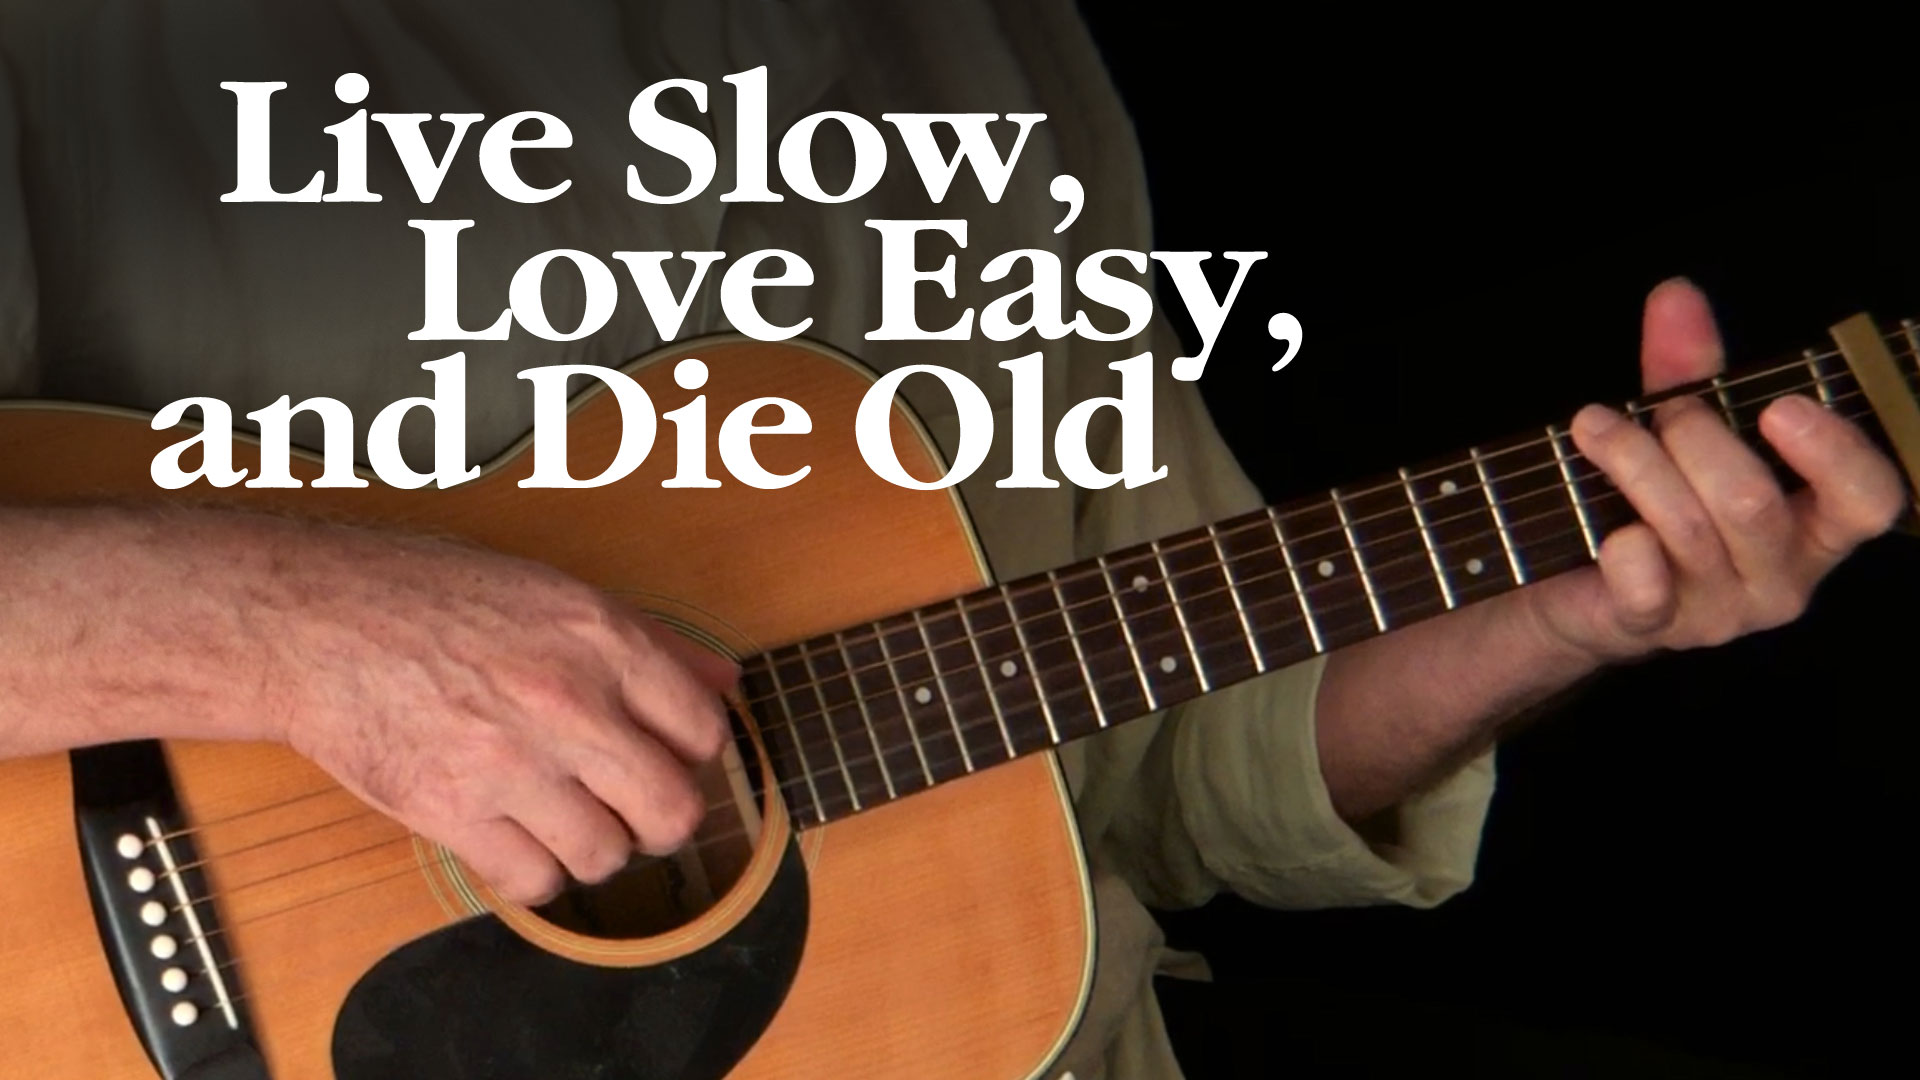 Live Slow, Love Easy, and Die Old